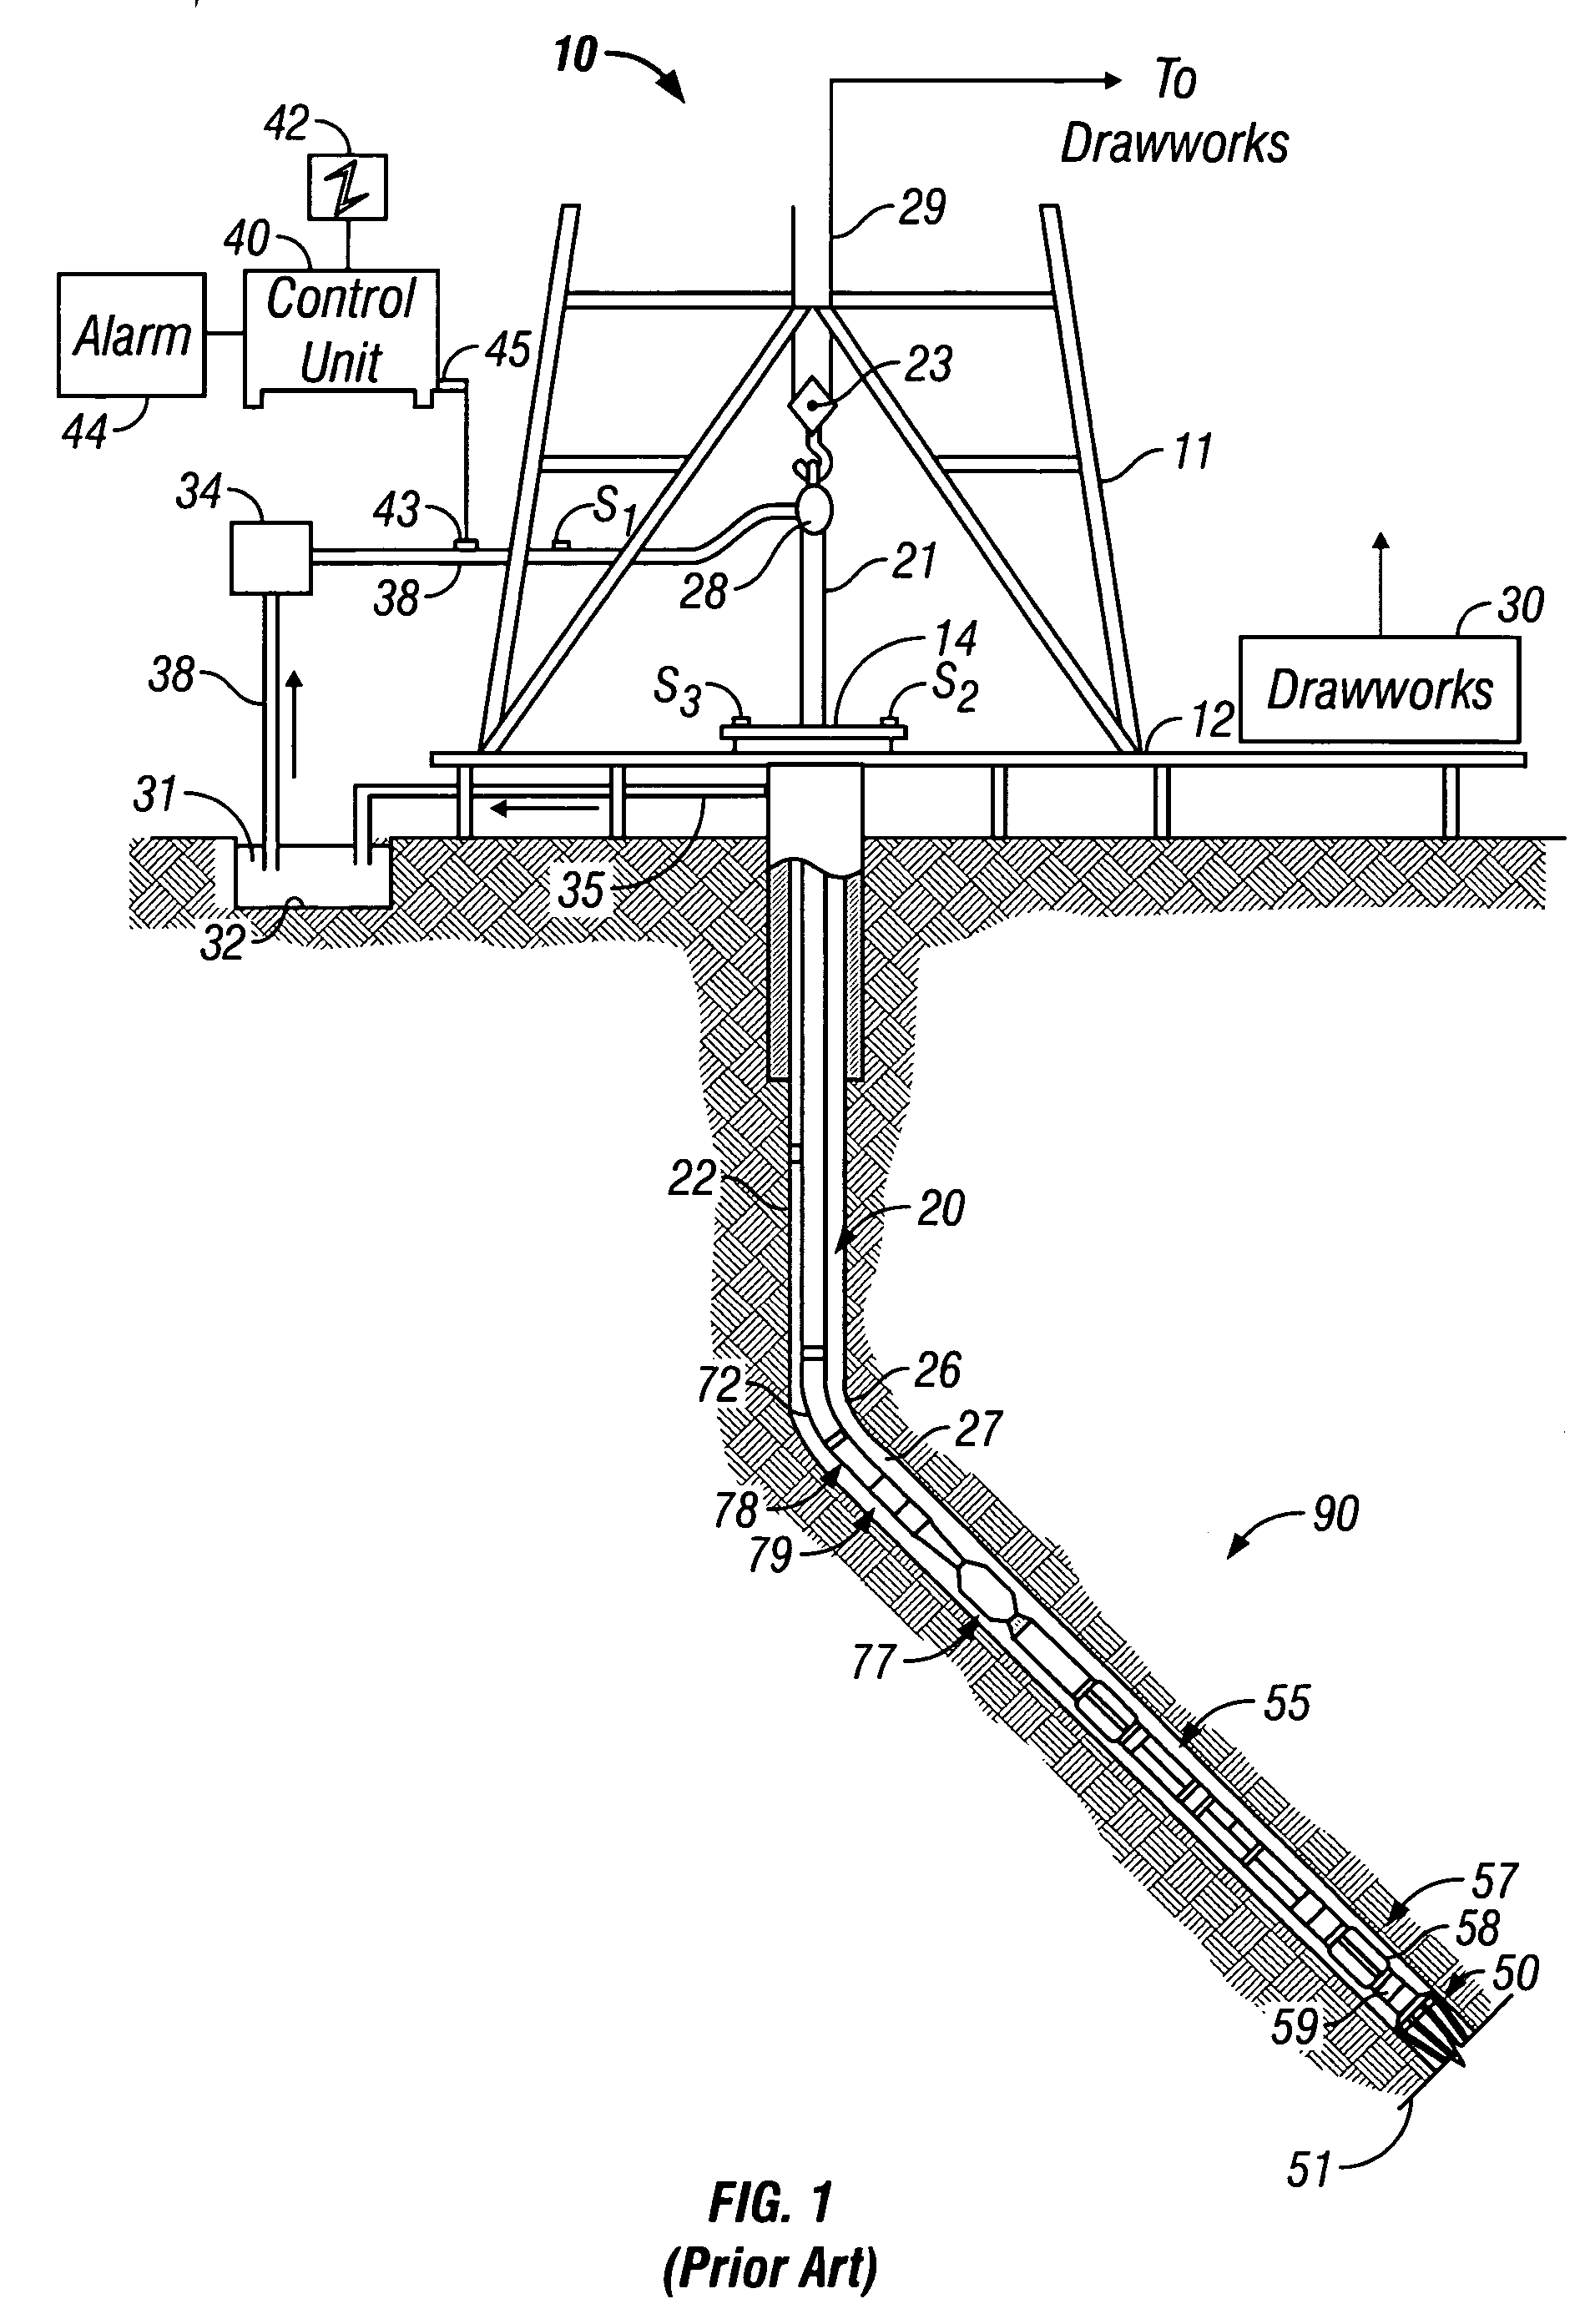 Method of eliminating conductive drill parasitic influence on the measurements of transient electromagnetic components in MWD tools